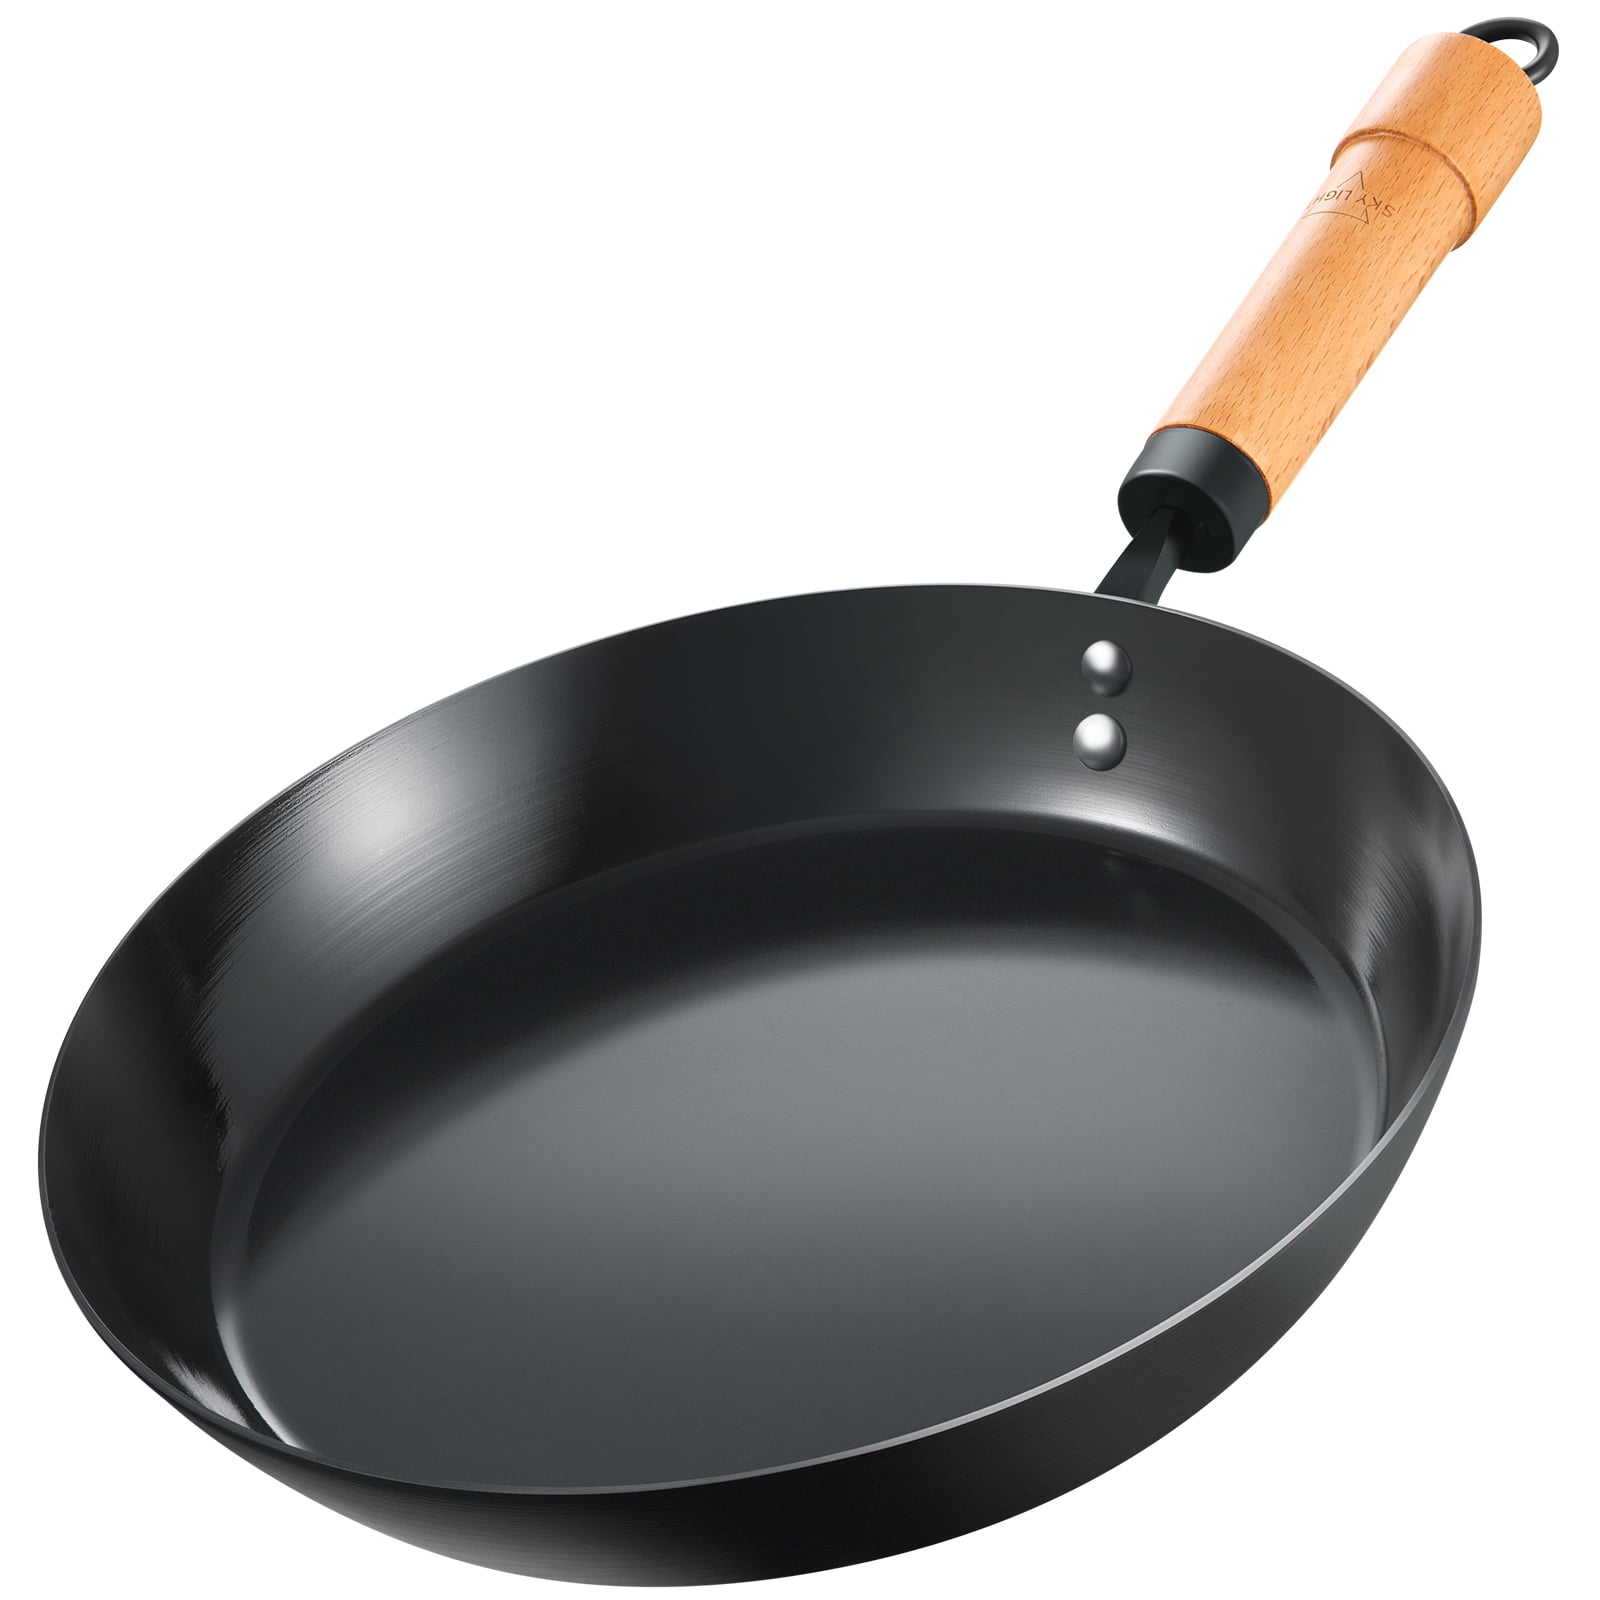 Carbon Steel Skillet, 11 Inch Black Iron Pans with Detachable Wooden  Handle, No Nonstick Coating Frying Omelette Pan - Compatible Induction